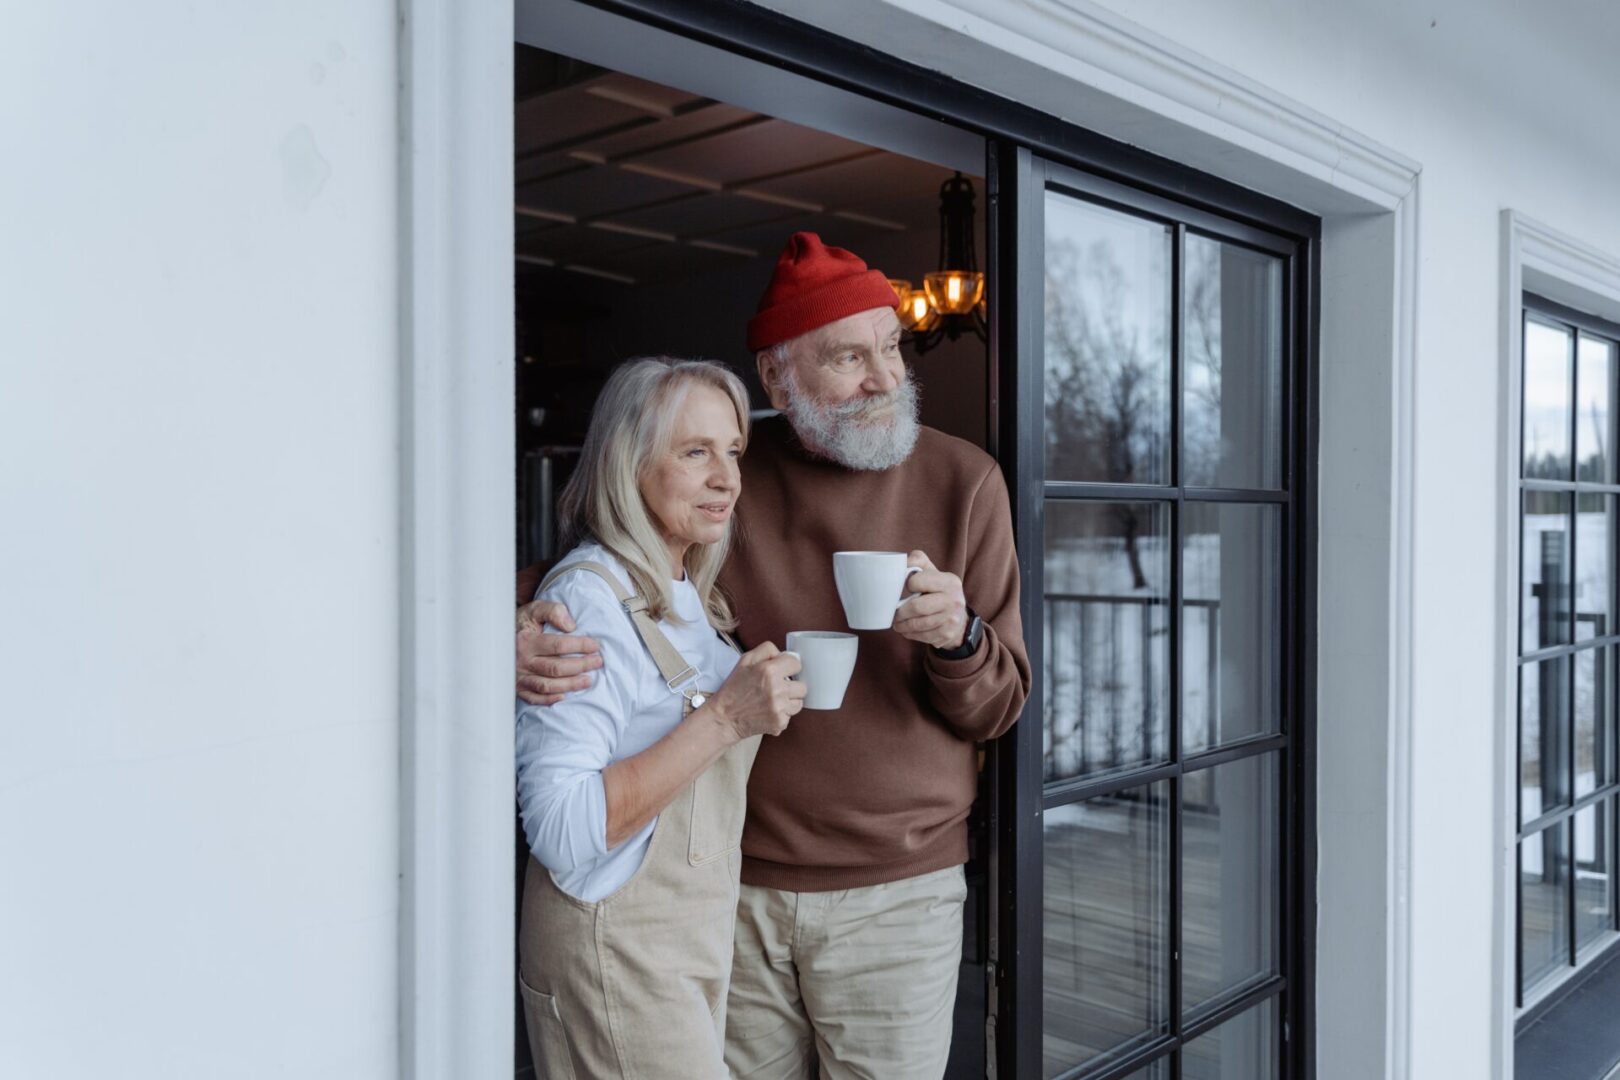 A man and woman holding coffee mugs in their hands.